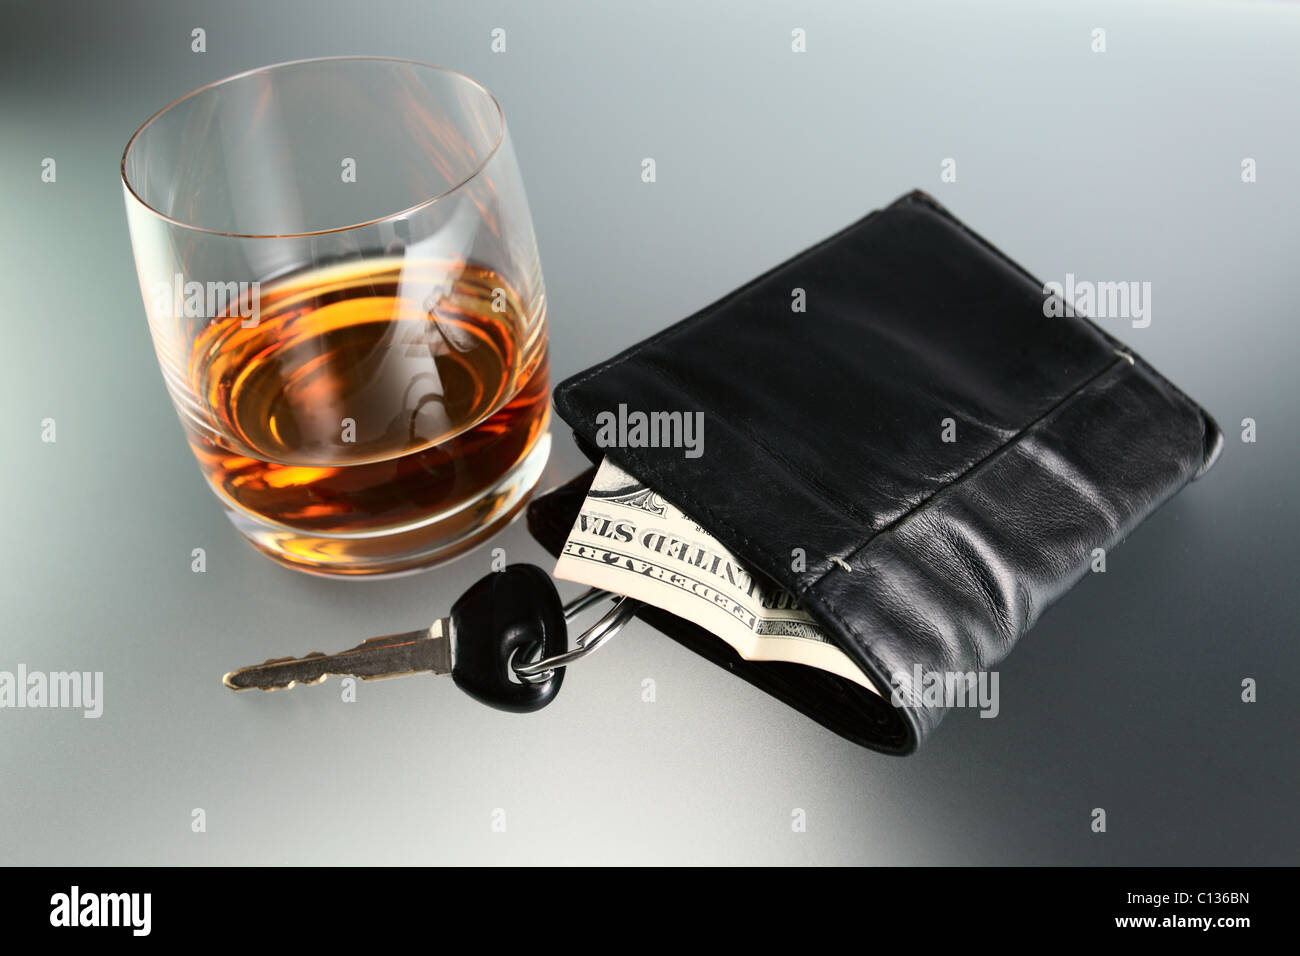 Whisky,money and key from car. Stock Photo